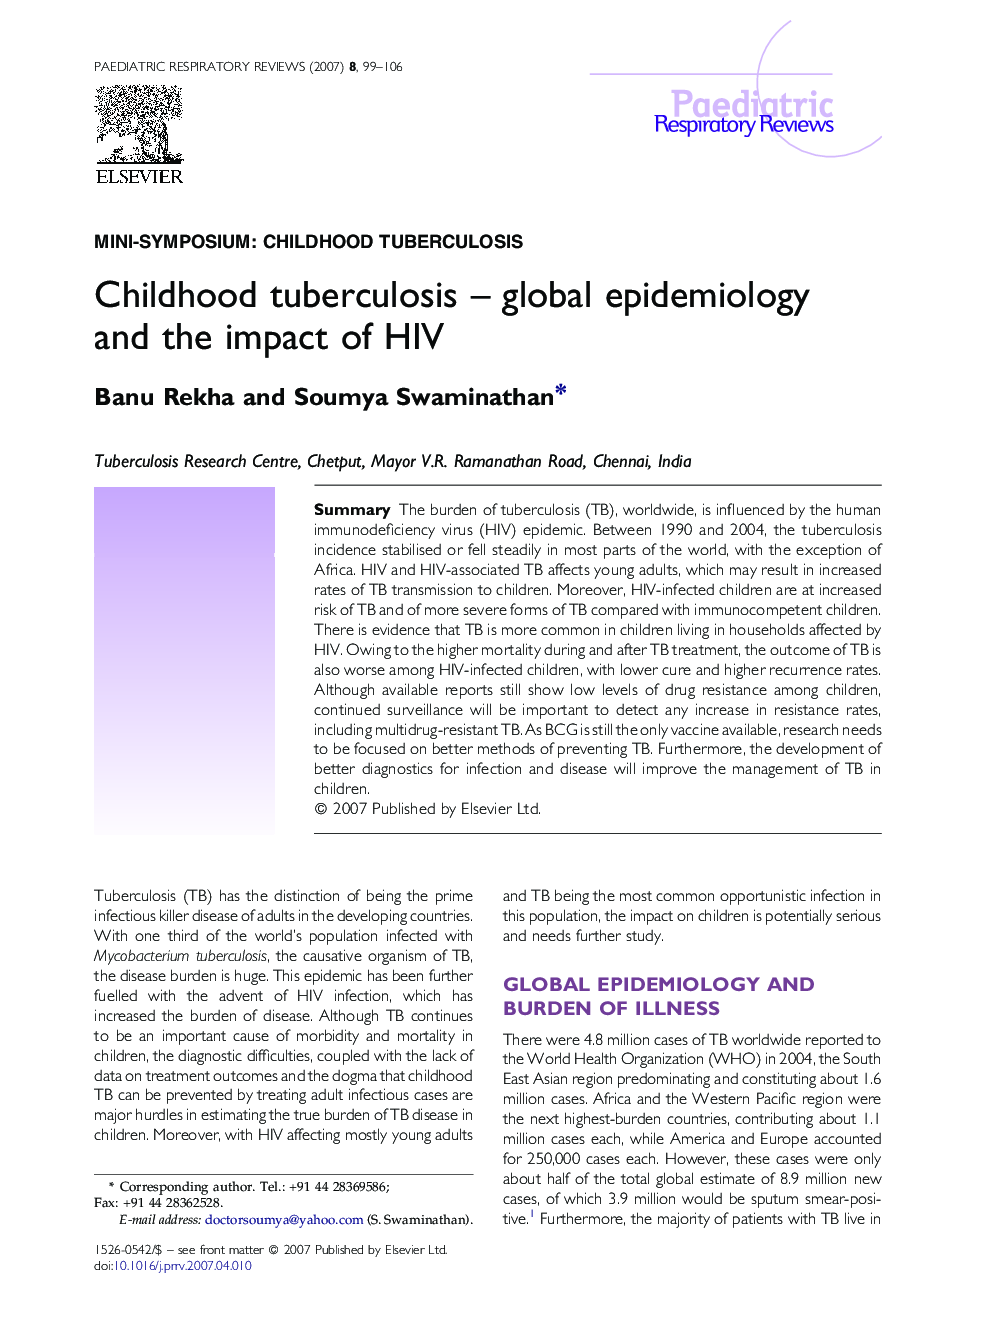 Childhood tuberculosis – global epidemiology and the impact of HIV